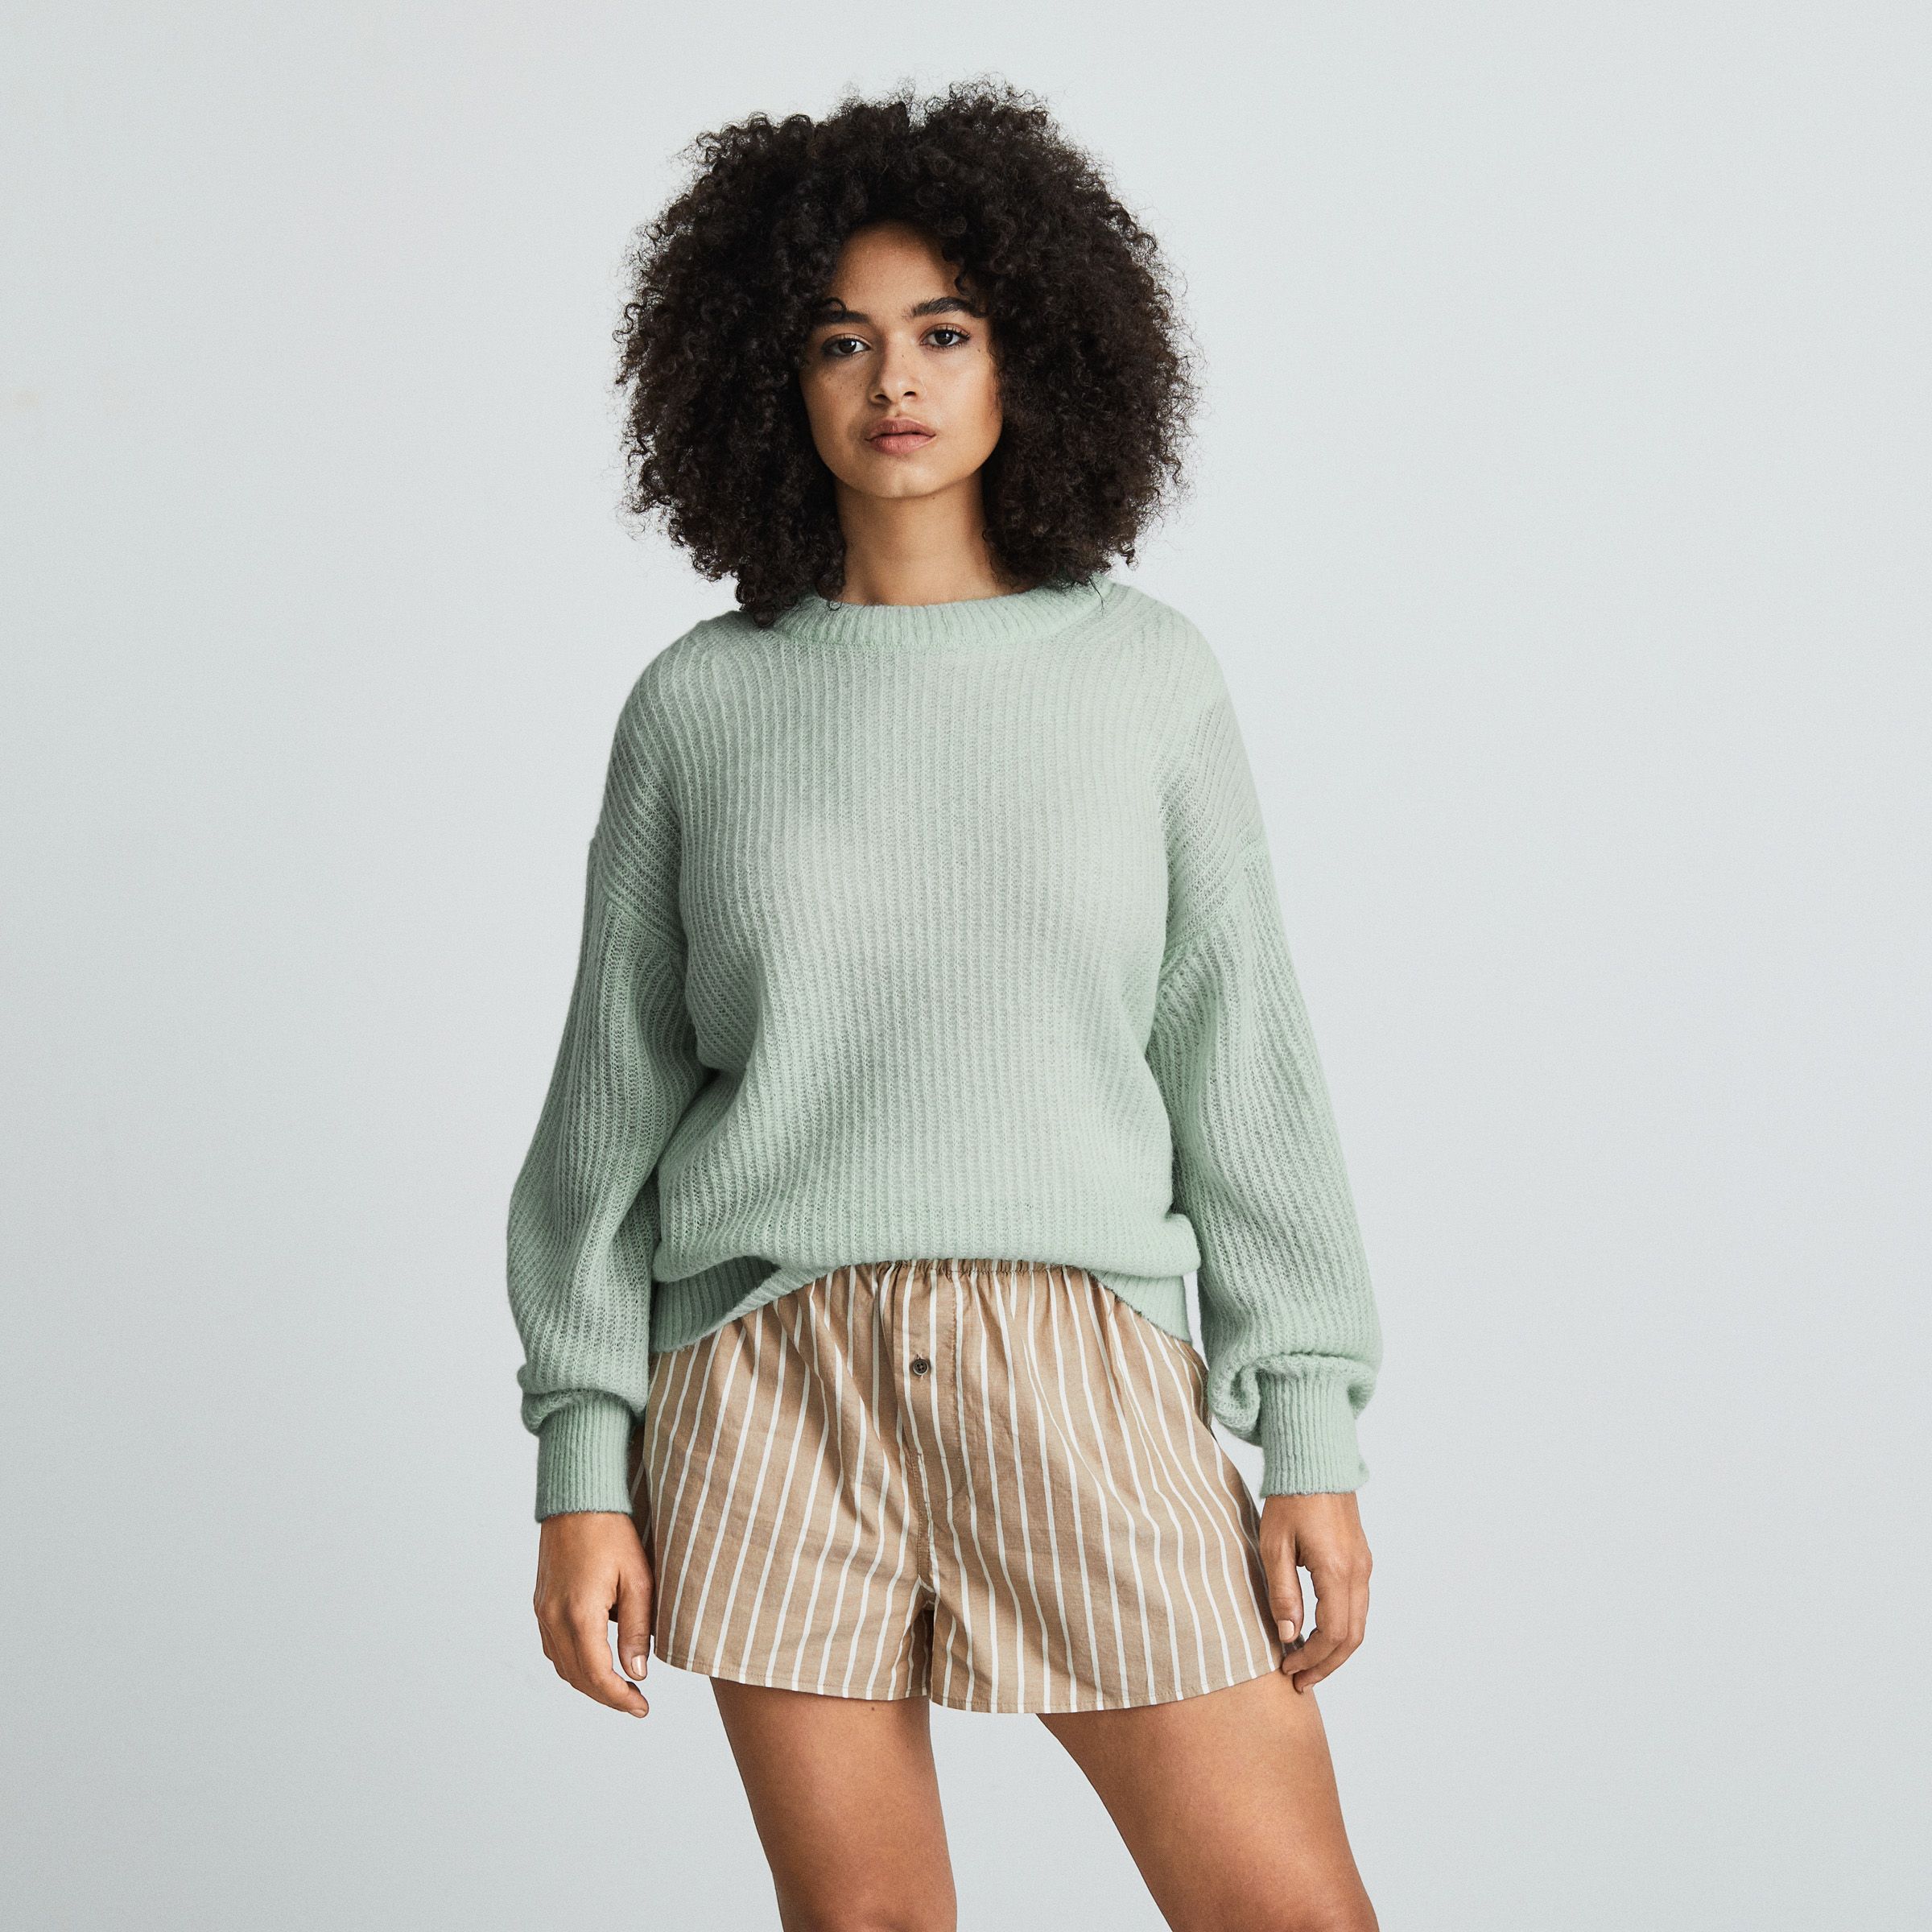 Sustainable Fashion for the Holidays from Everlane